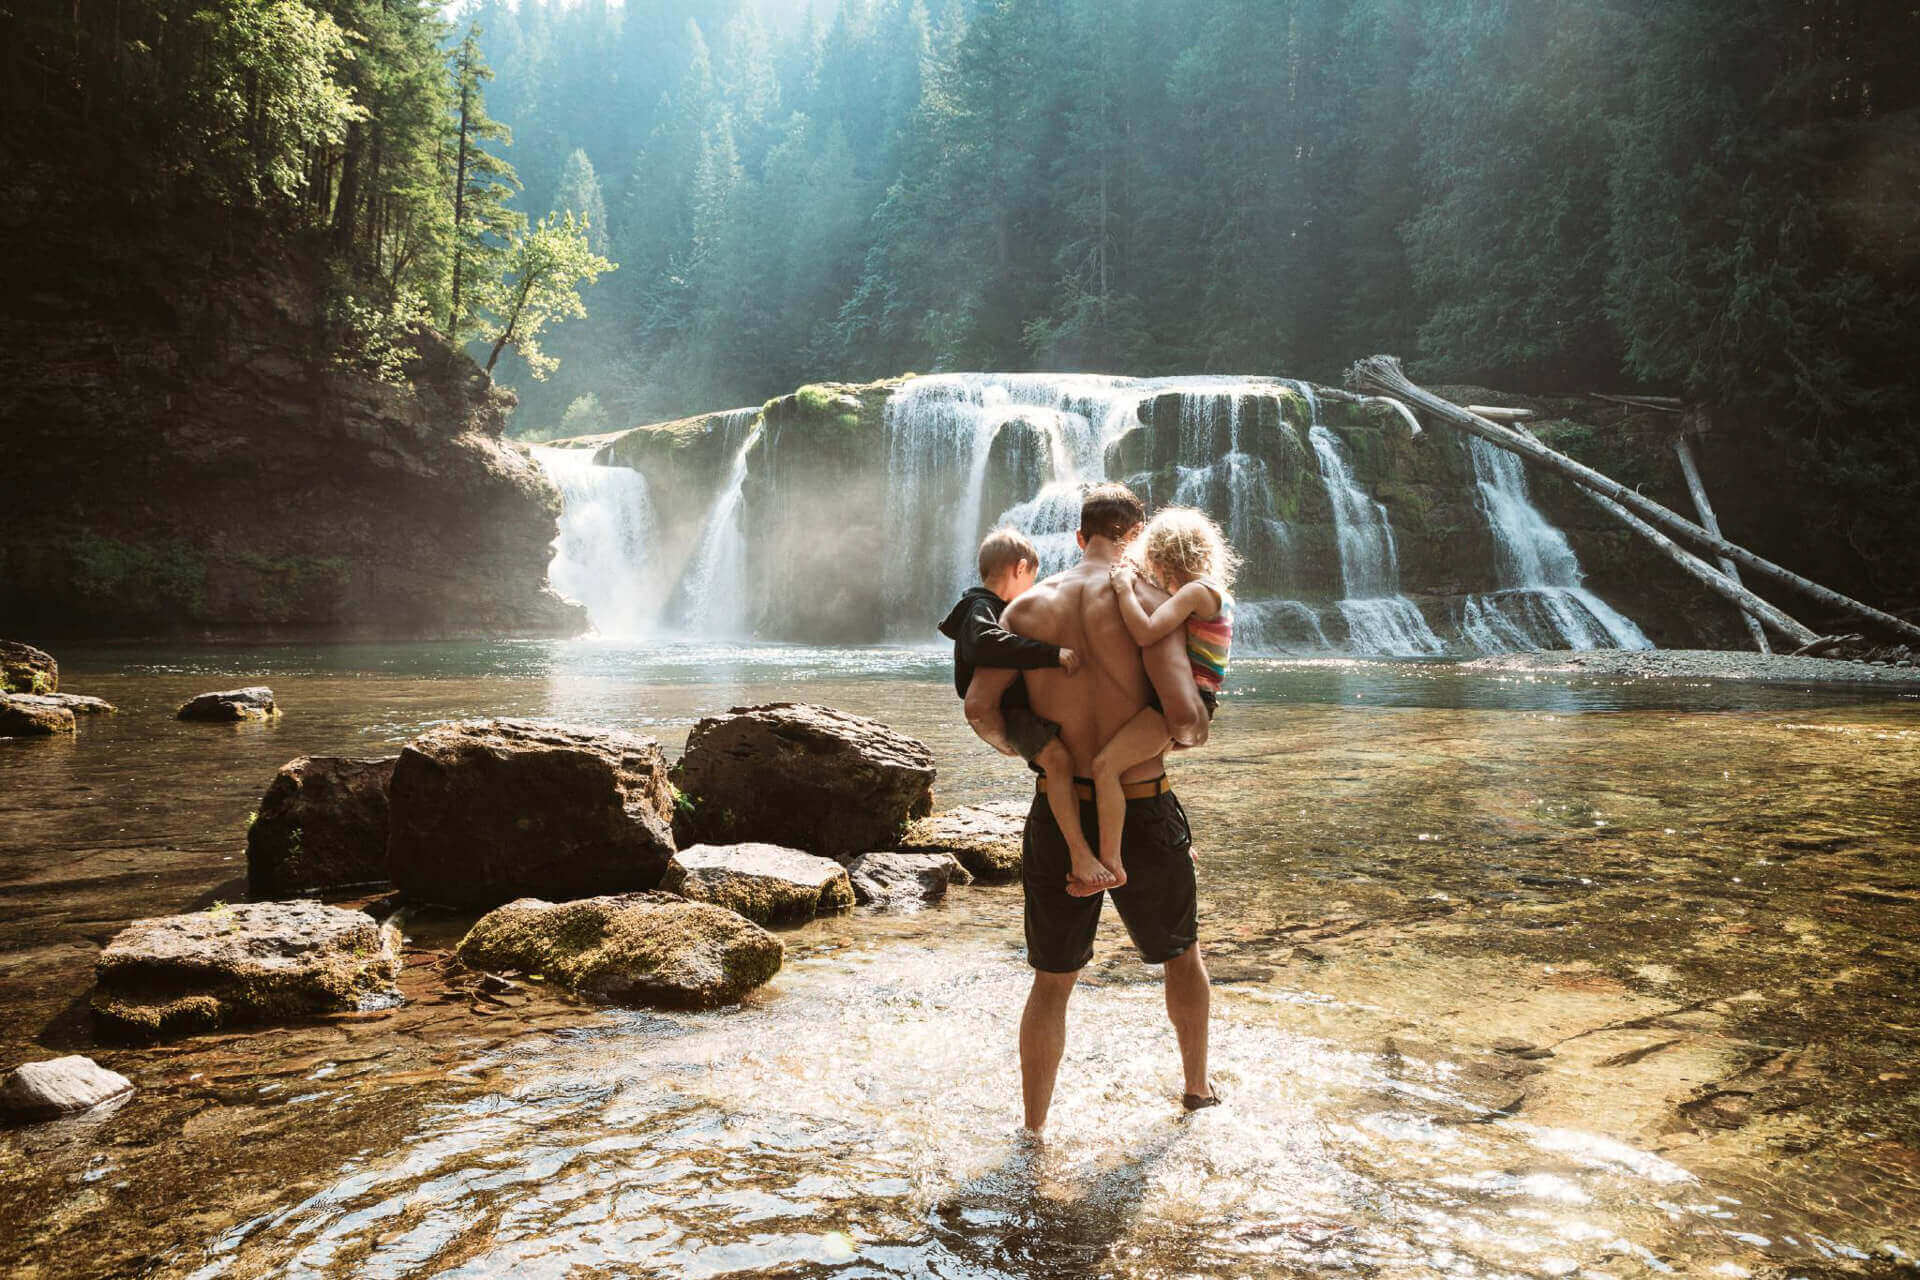 A man holders two small children while standing in the water in front of Lower Lewis Falls.